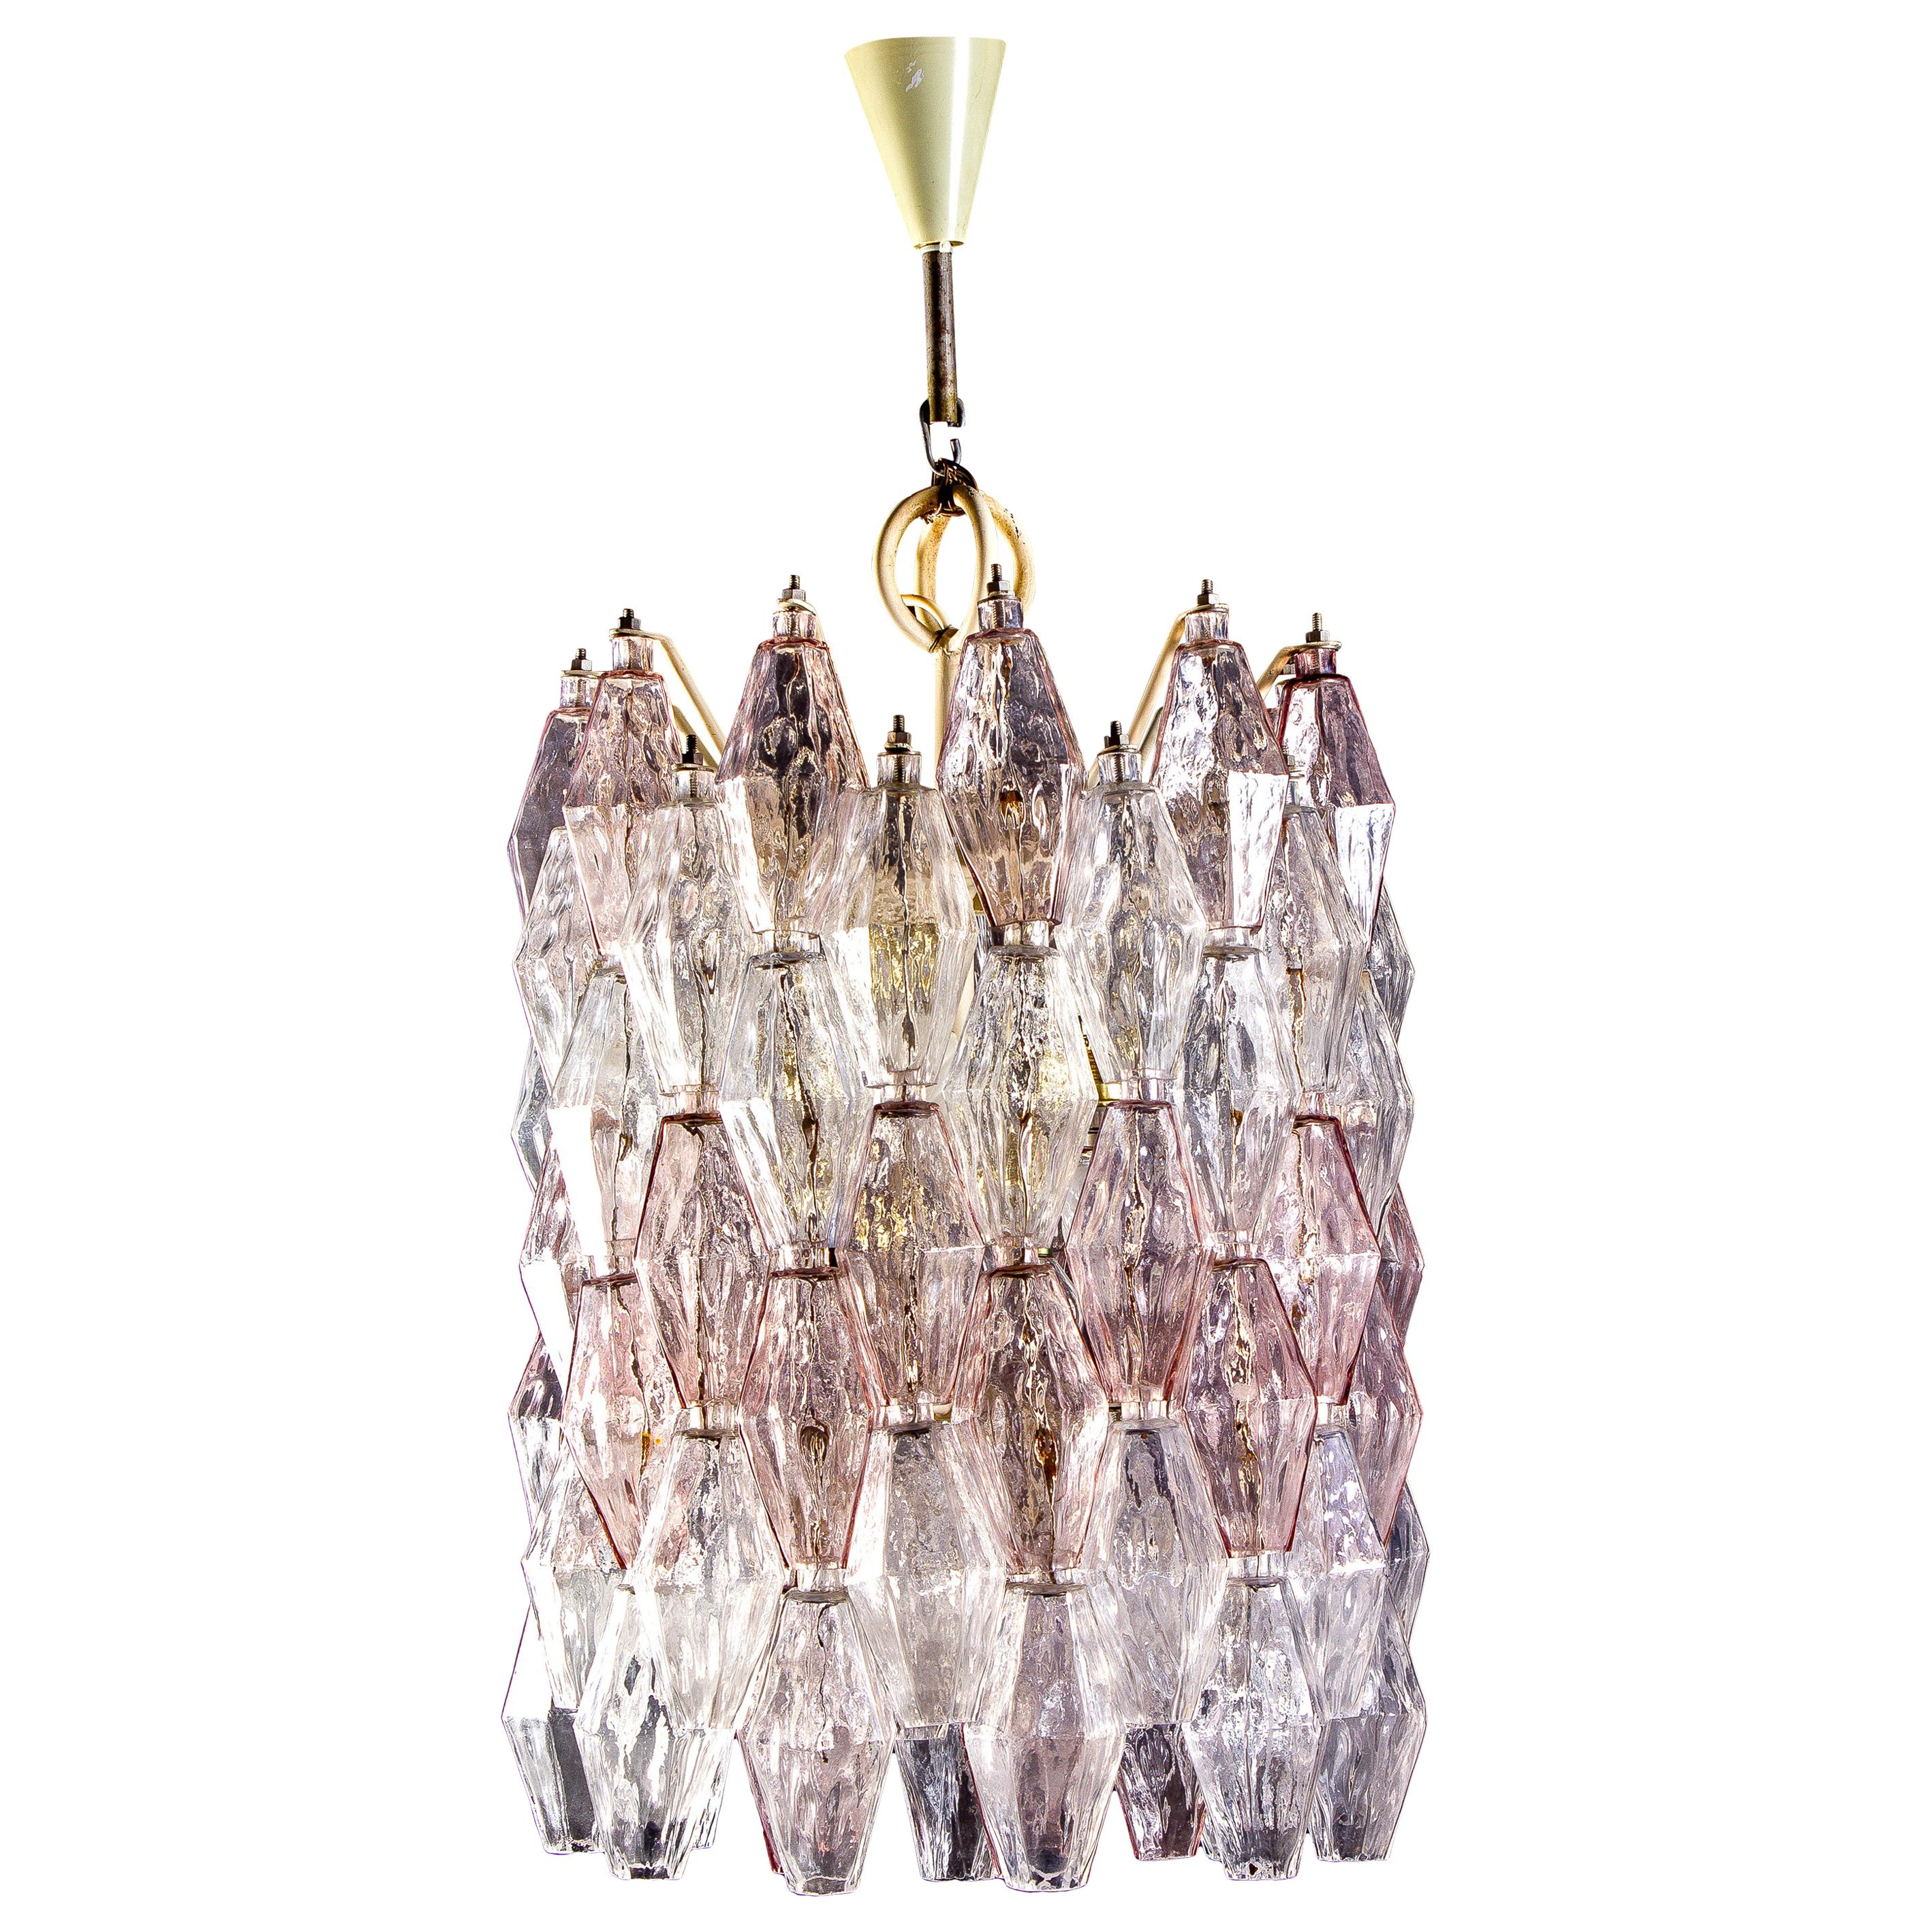 Fabulous original Venini Poliedri chandelier by Carlo Scarpa. Rare combination of light pink and Ice colored Murano glass.
Ivory painted frame in very good original condition.
      